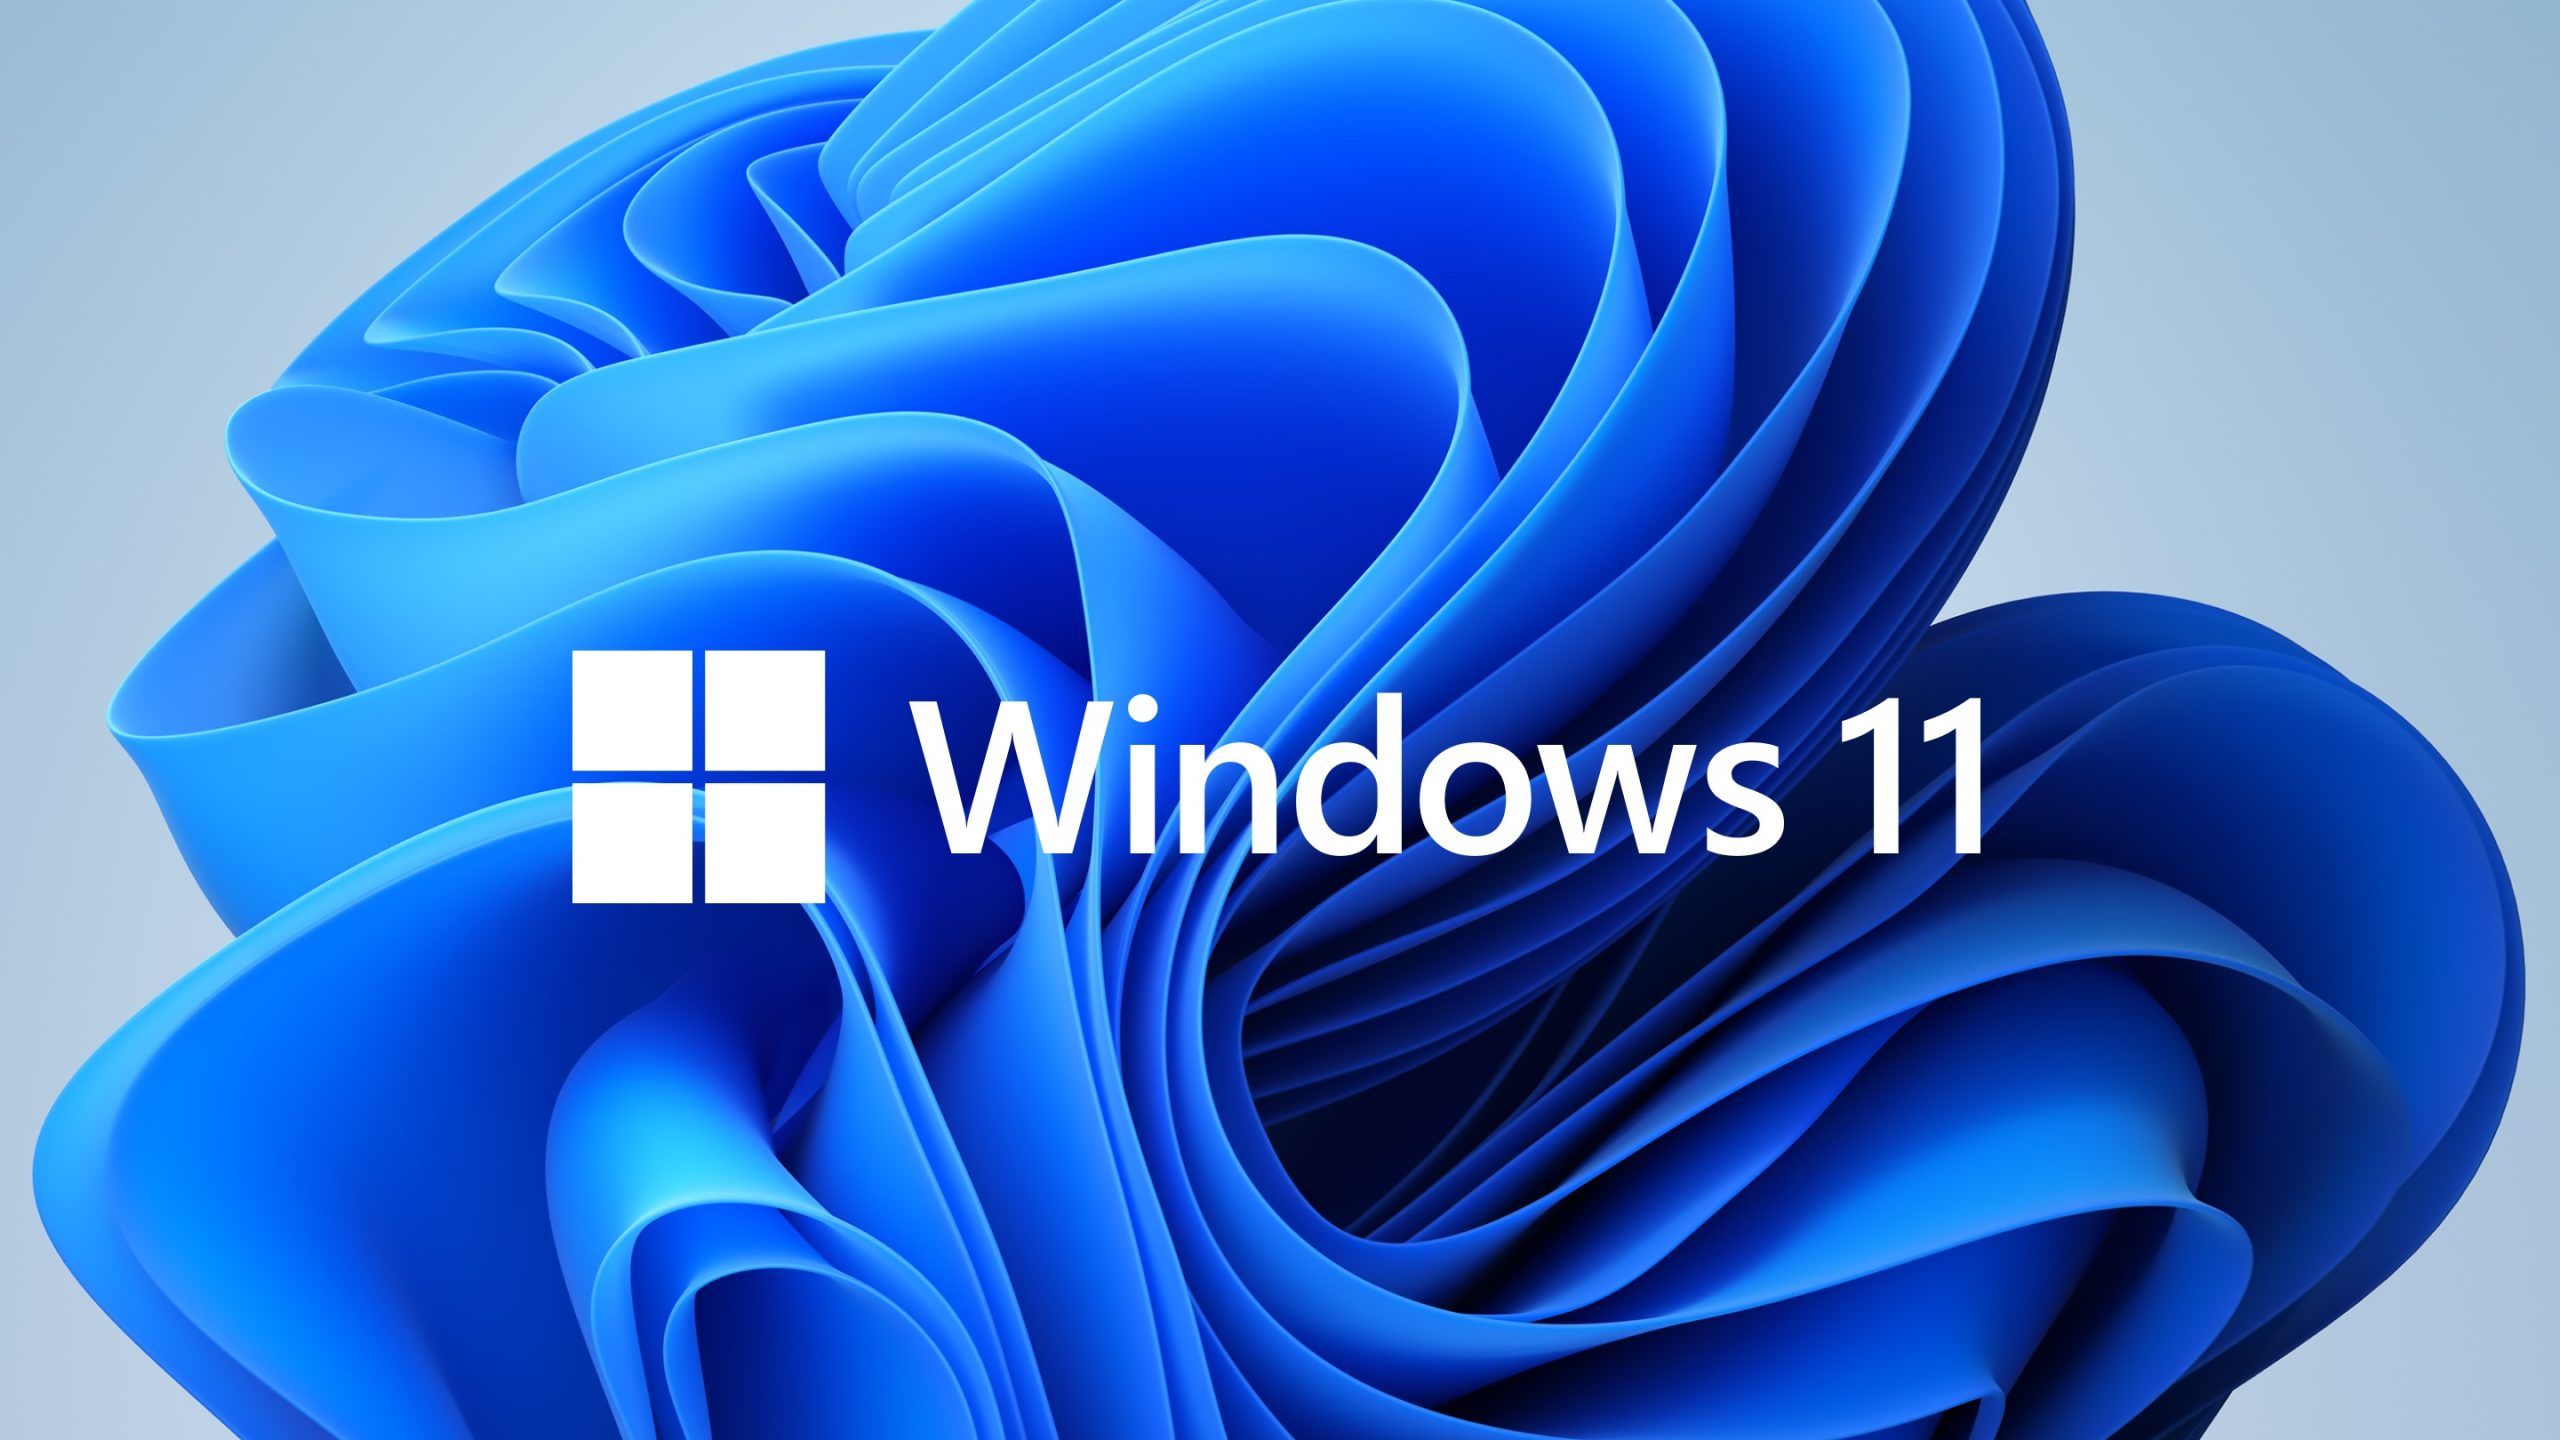 You will also be able to install Windows 11 on older PCs